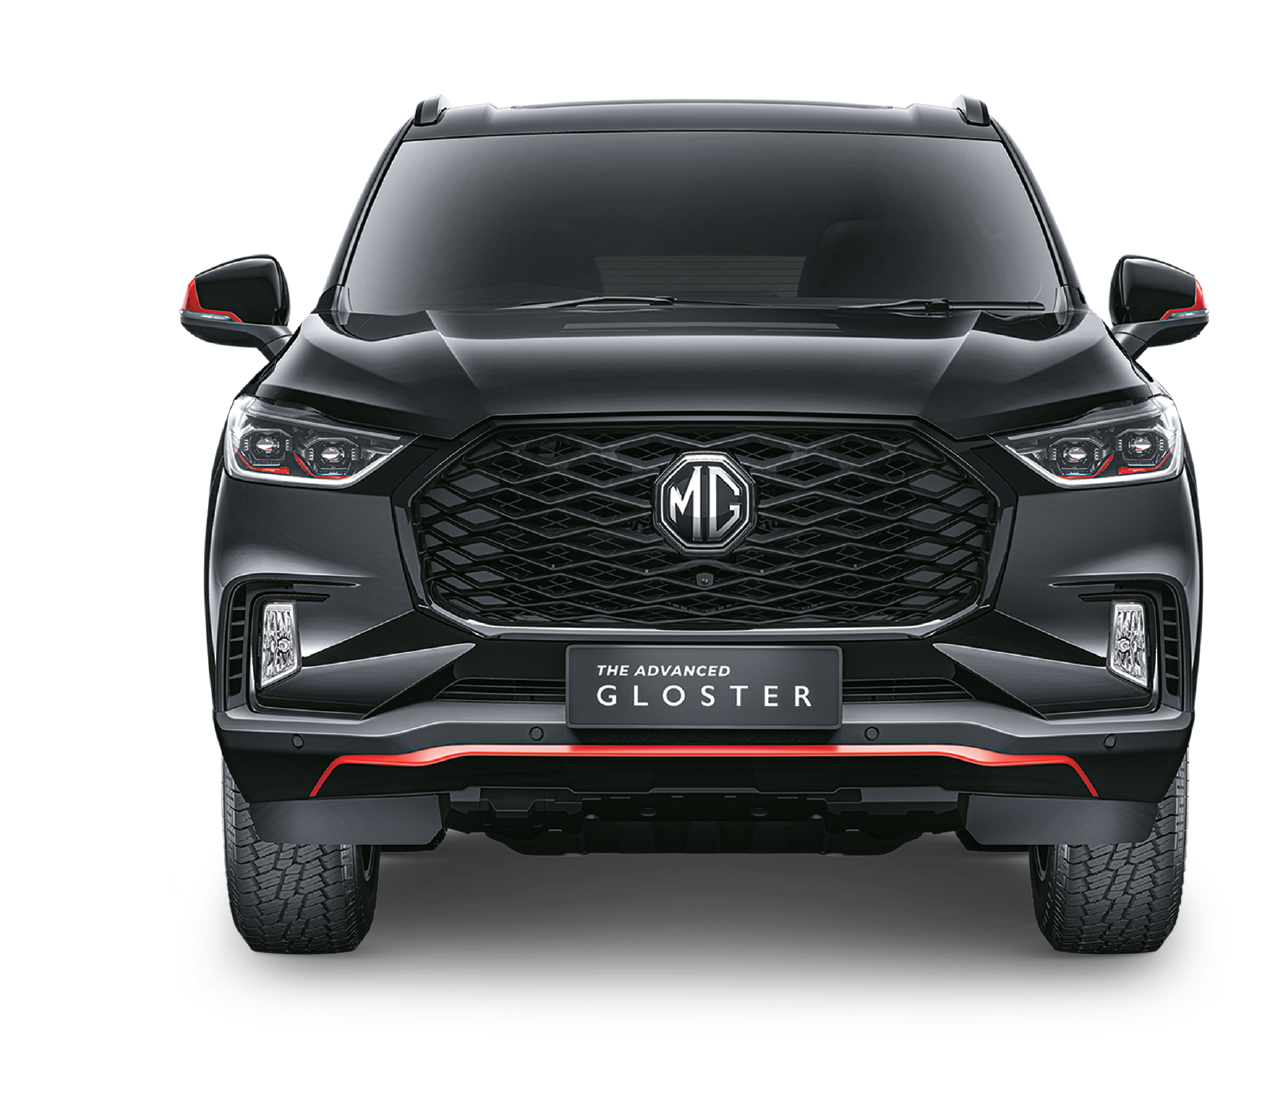 MG Motor India announces ownership experience program for Gloster